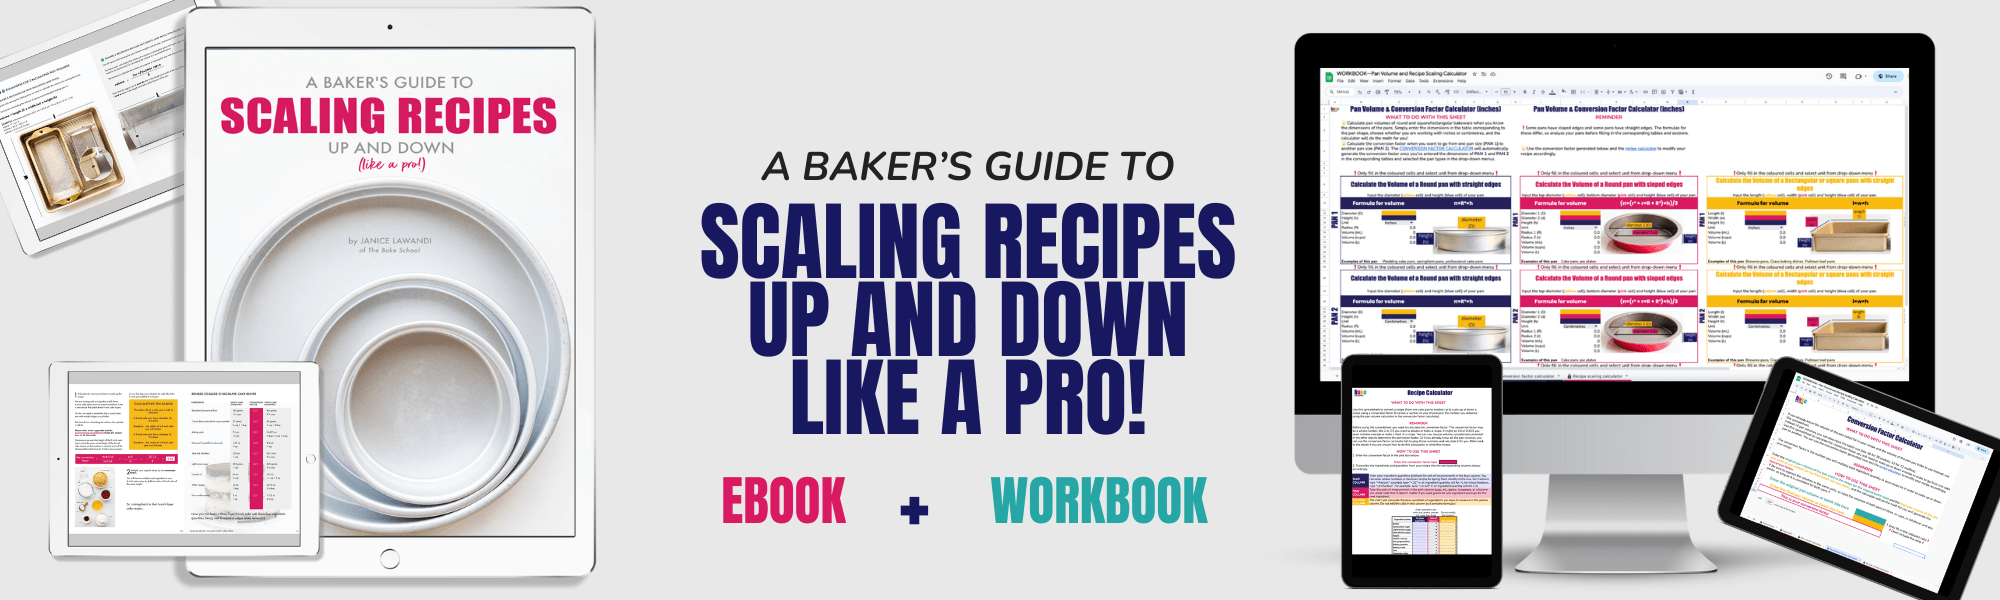 Recipe scaling calculator and ebook promotional banner.